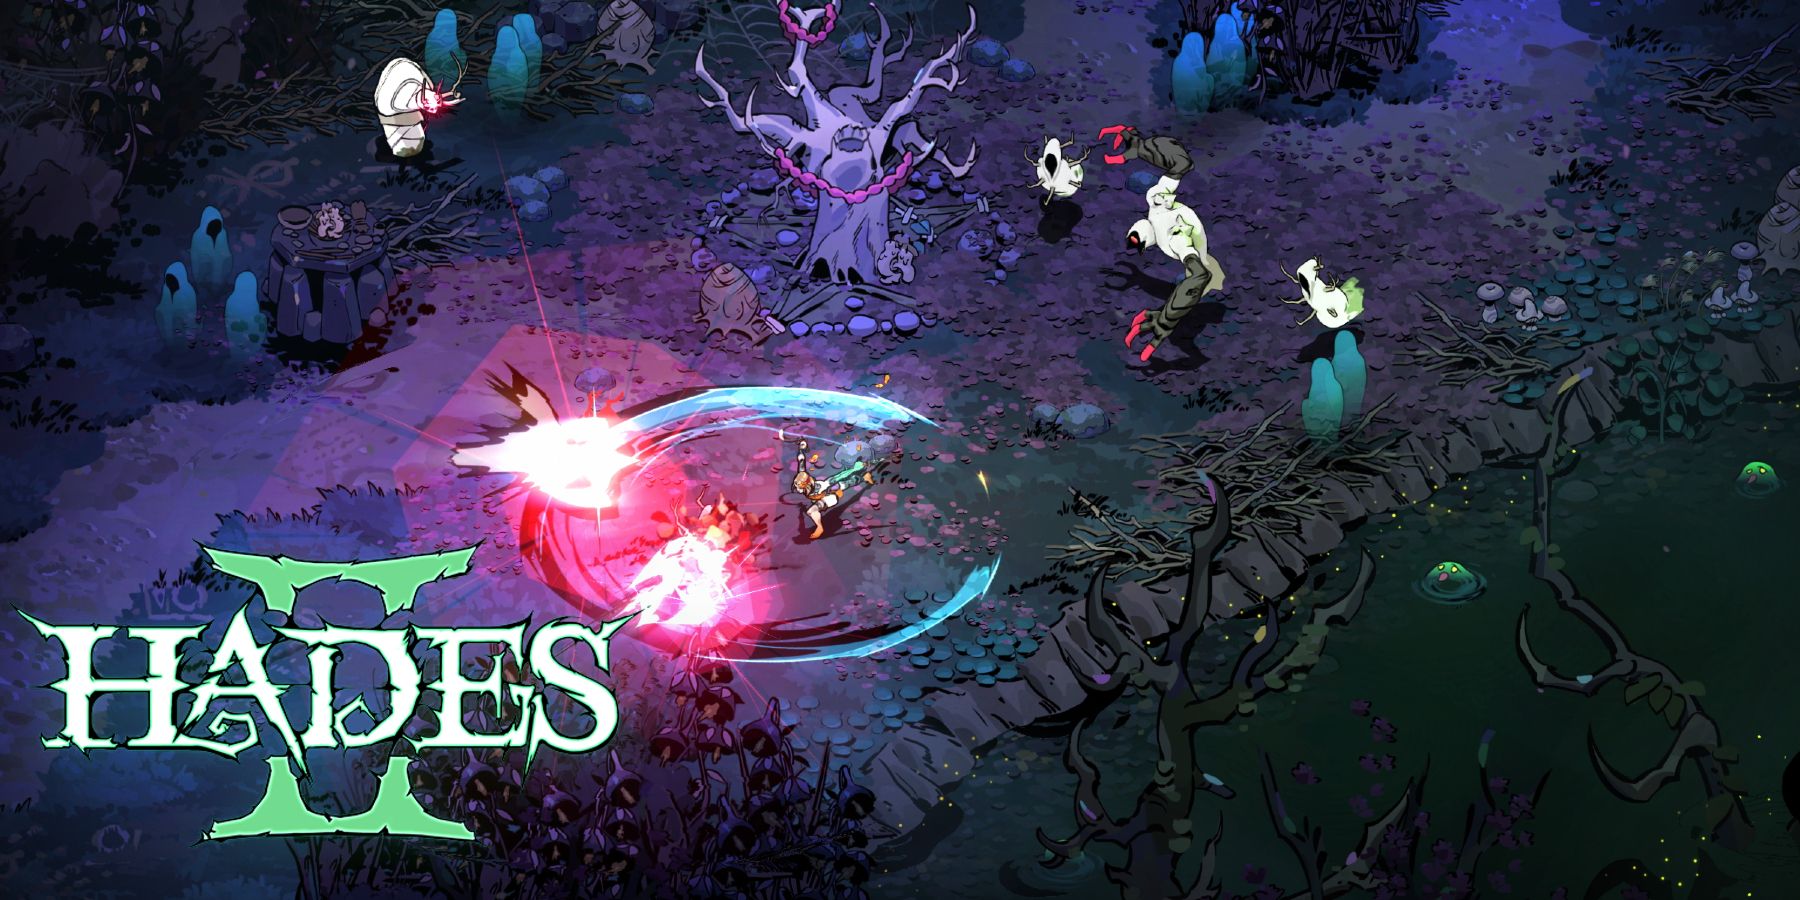 The early access launch of Hades 2 is delayed, but it's not all